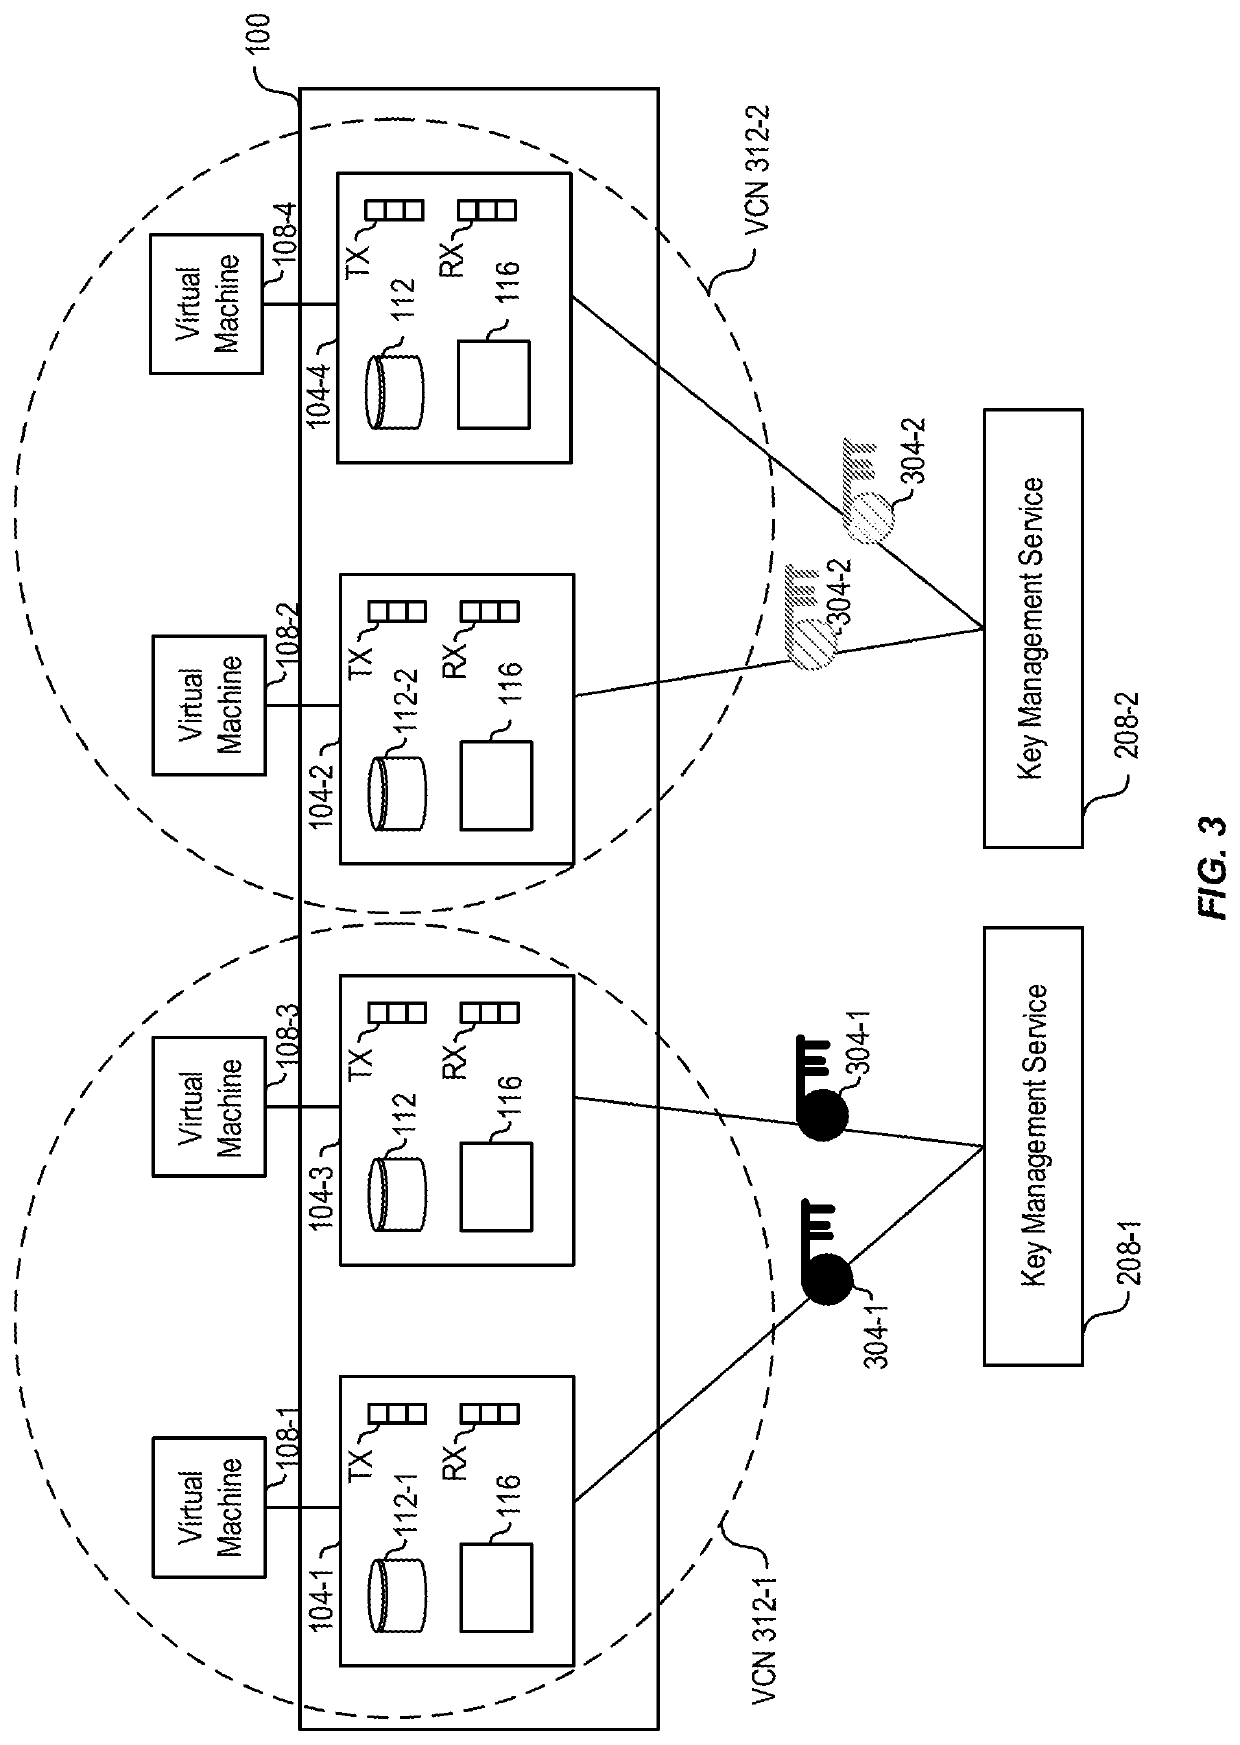 Mechanism to provide customer vcn network encryption using customer-managed keys in network virtualization device